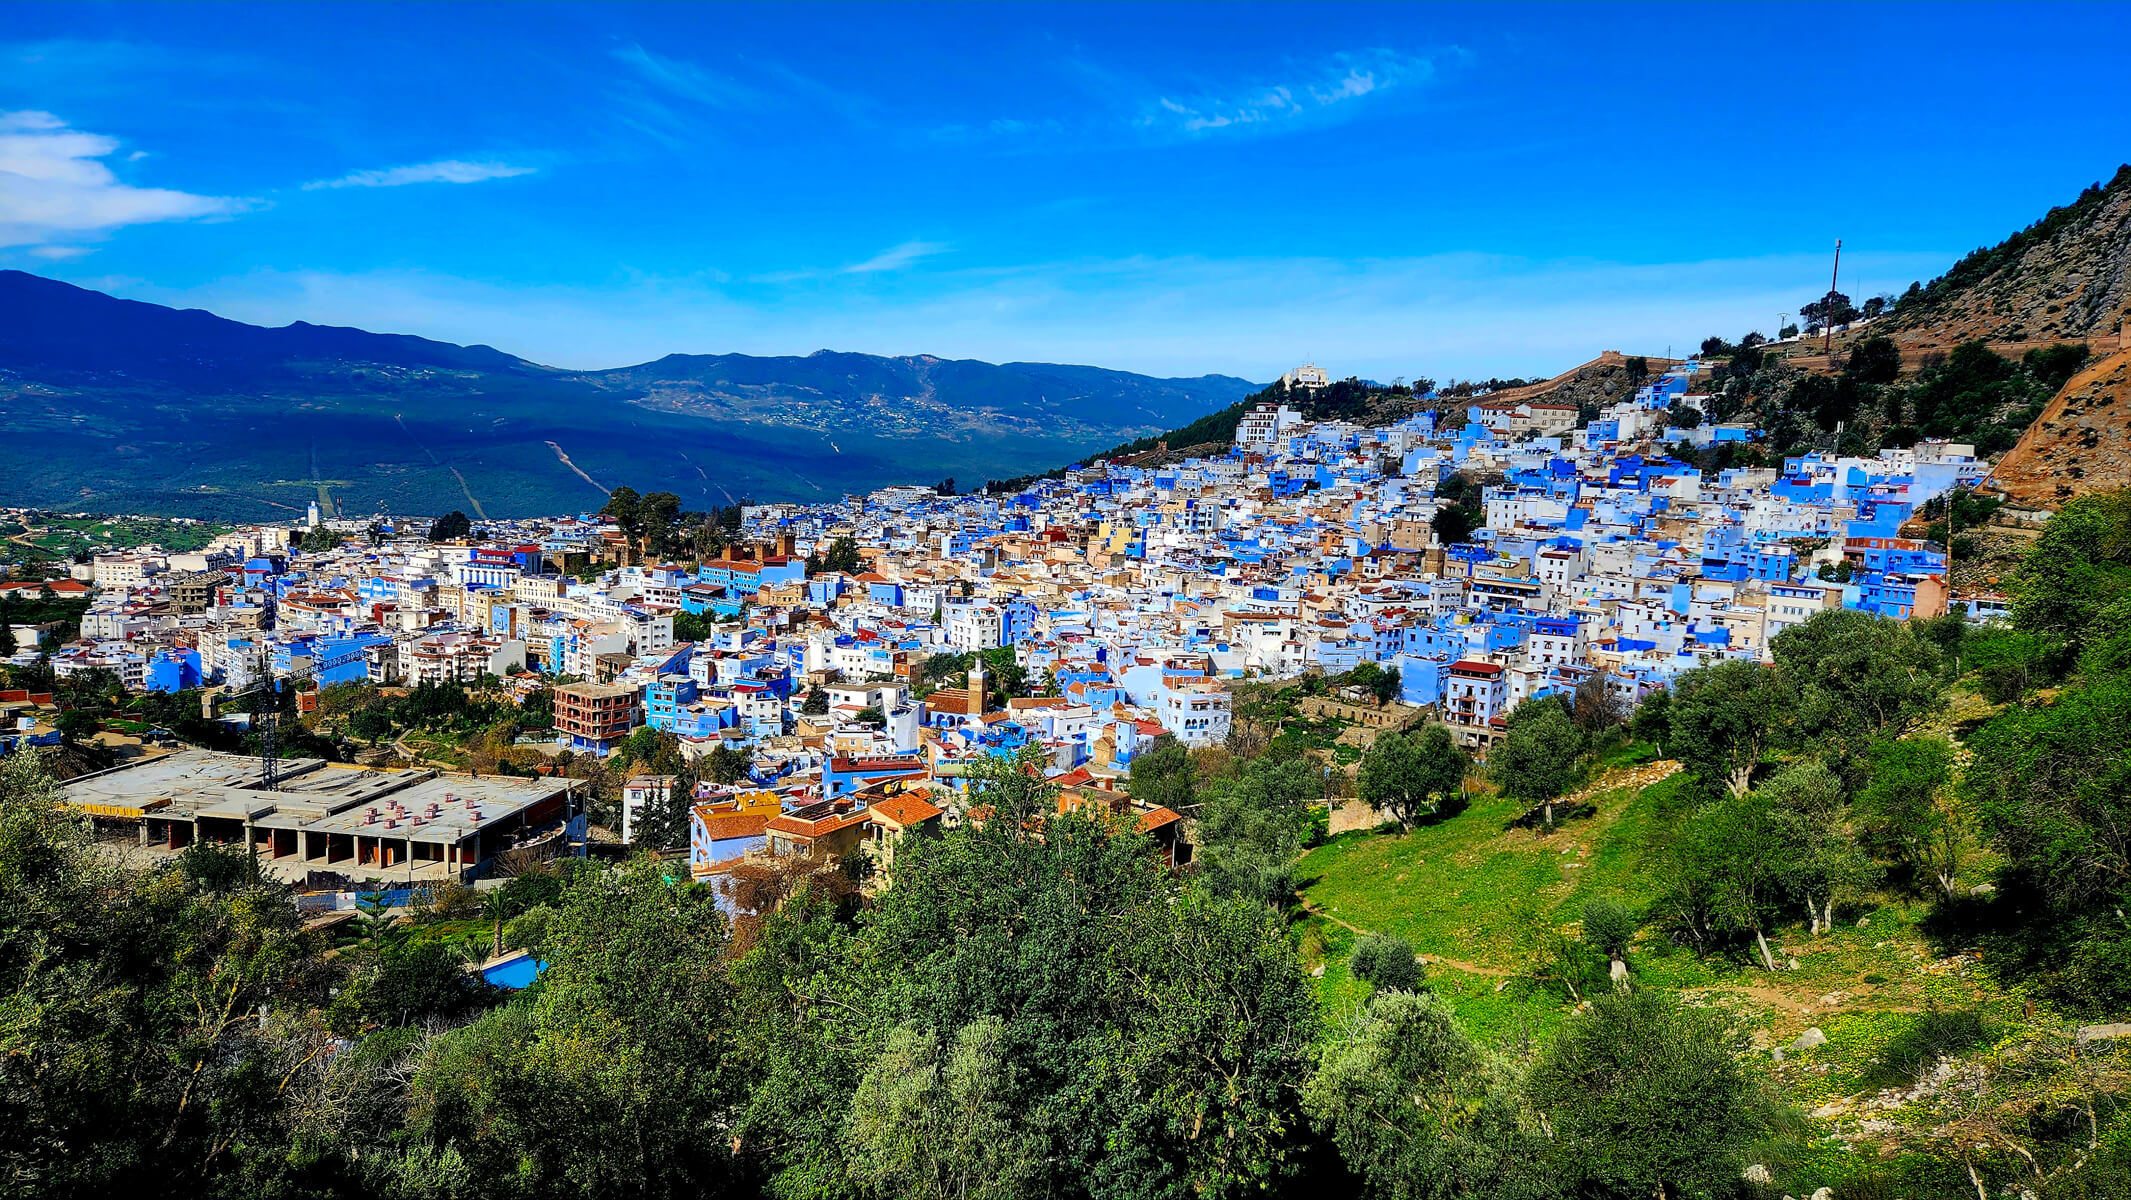 View of Chefchaouen - The Blue Pearl